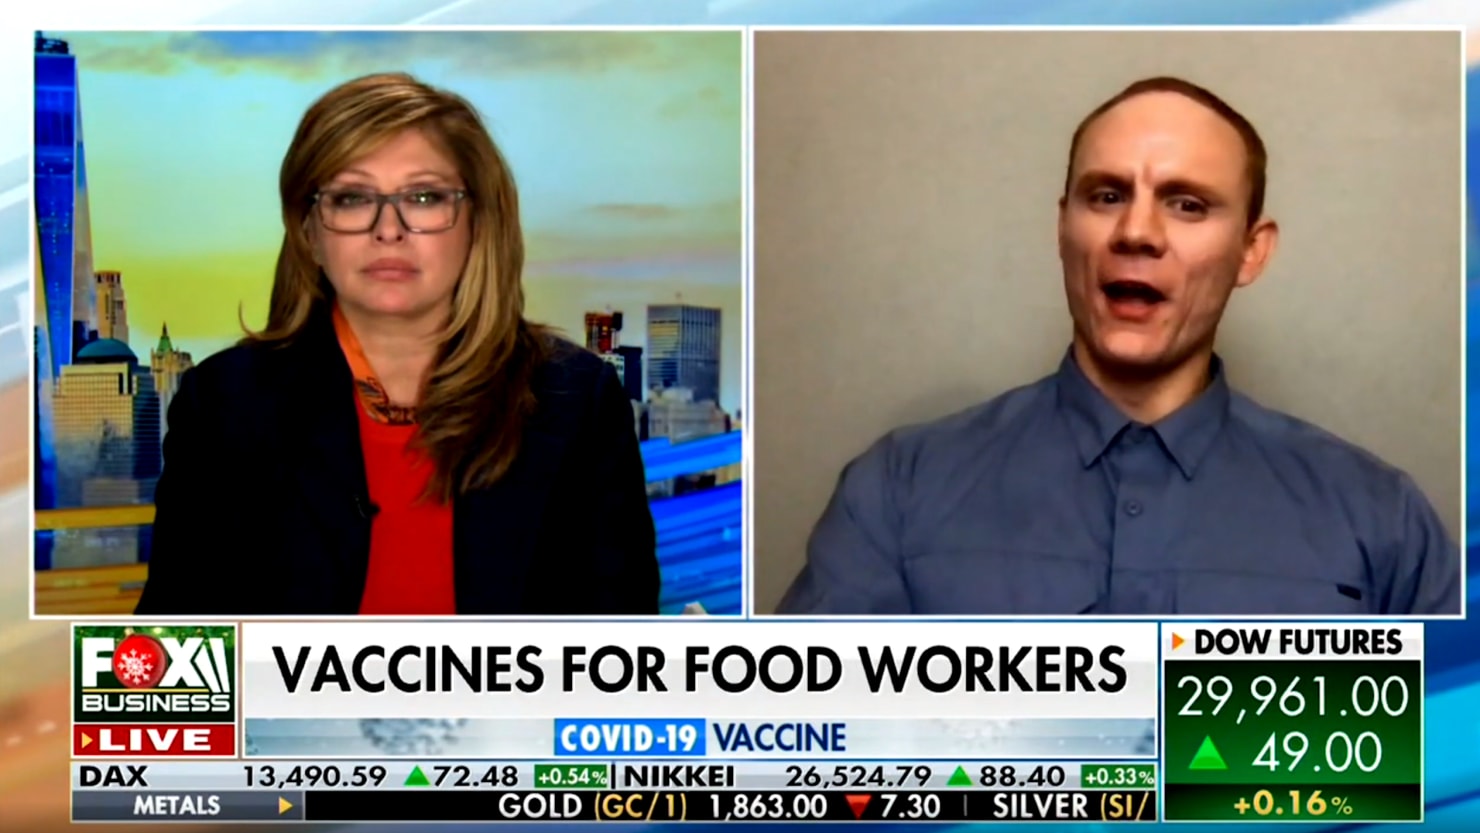 Fox’s Maria Bartiromo tricked by animal rights activist, pretending to be CEO of Smithfield Meat Company